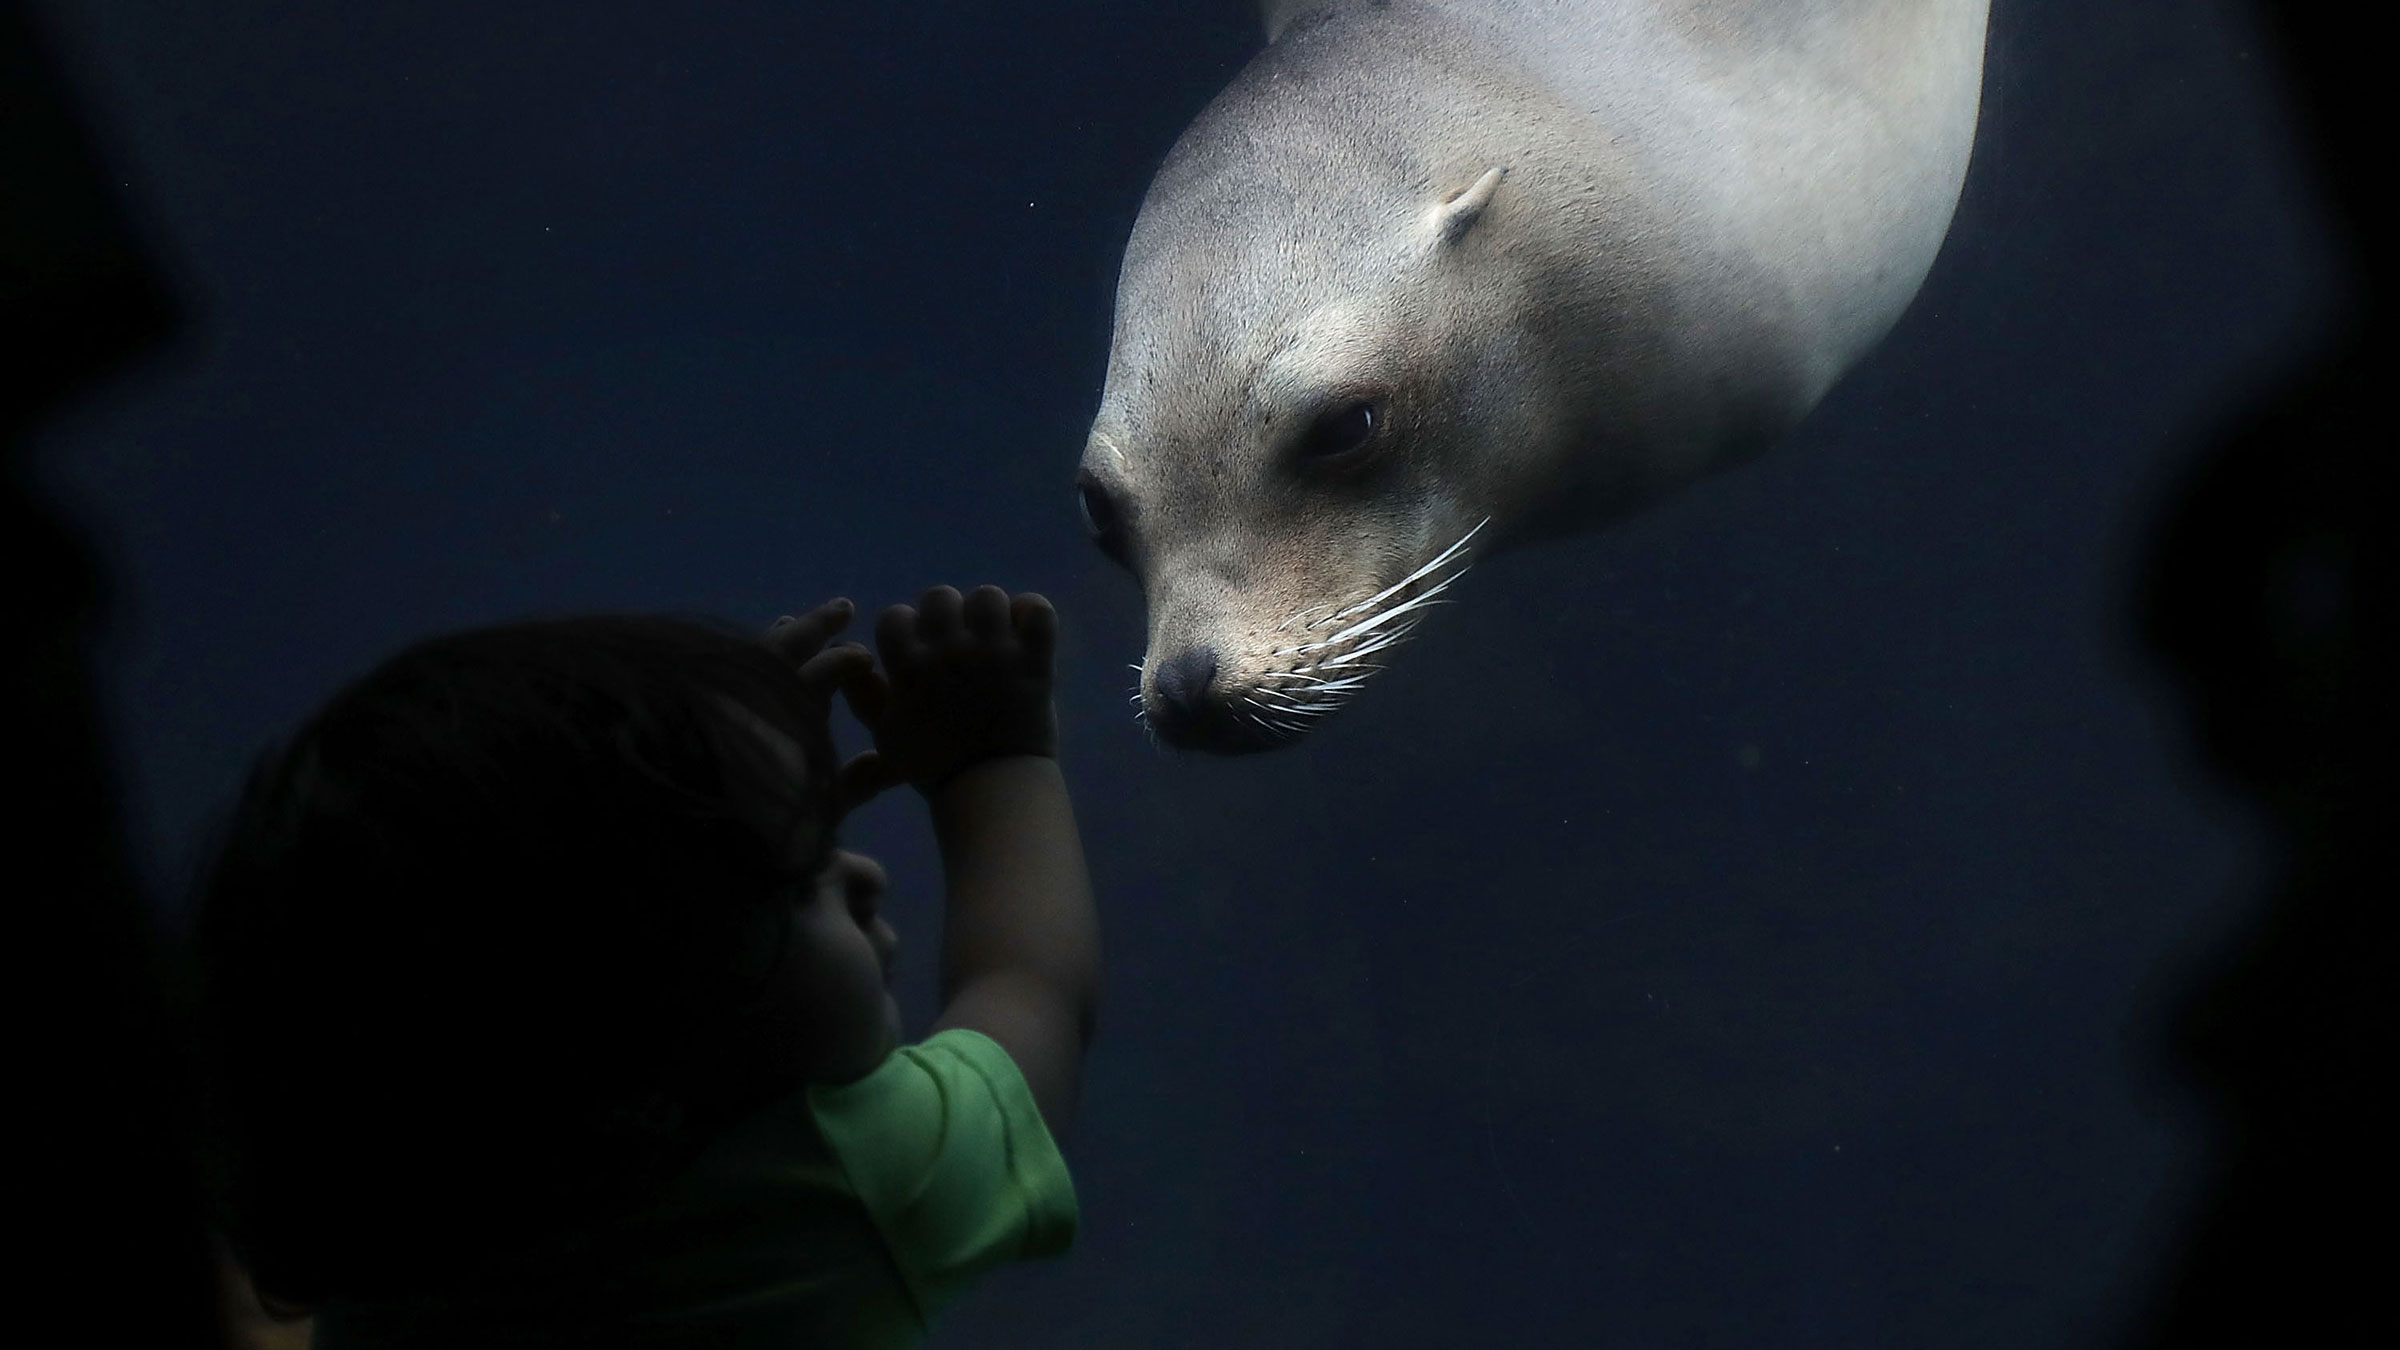 A young boy watches a California sea lion at the National Zoo in Washington, DC.